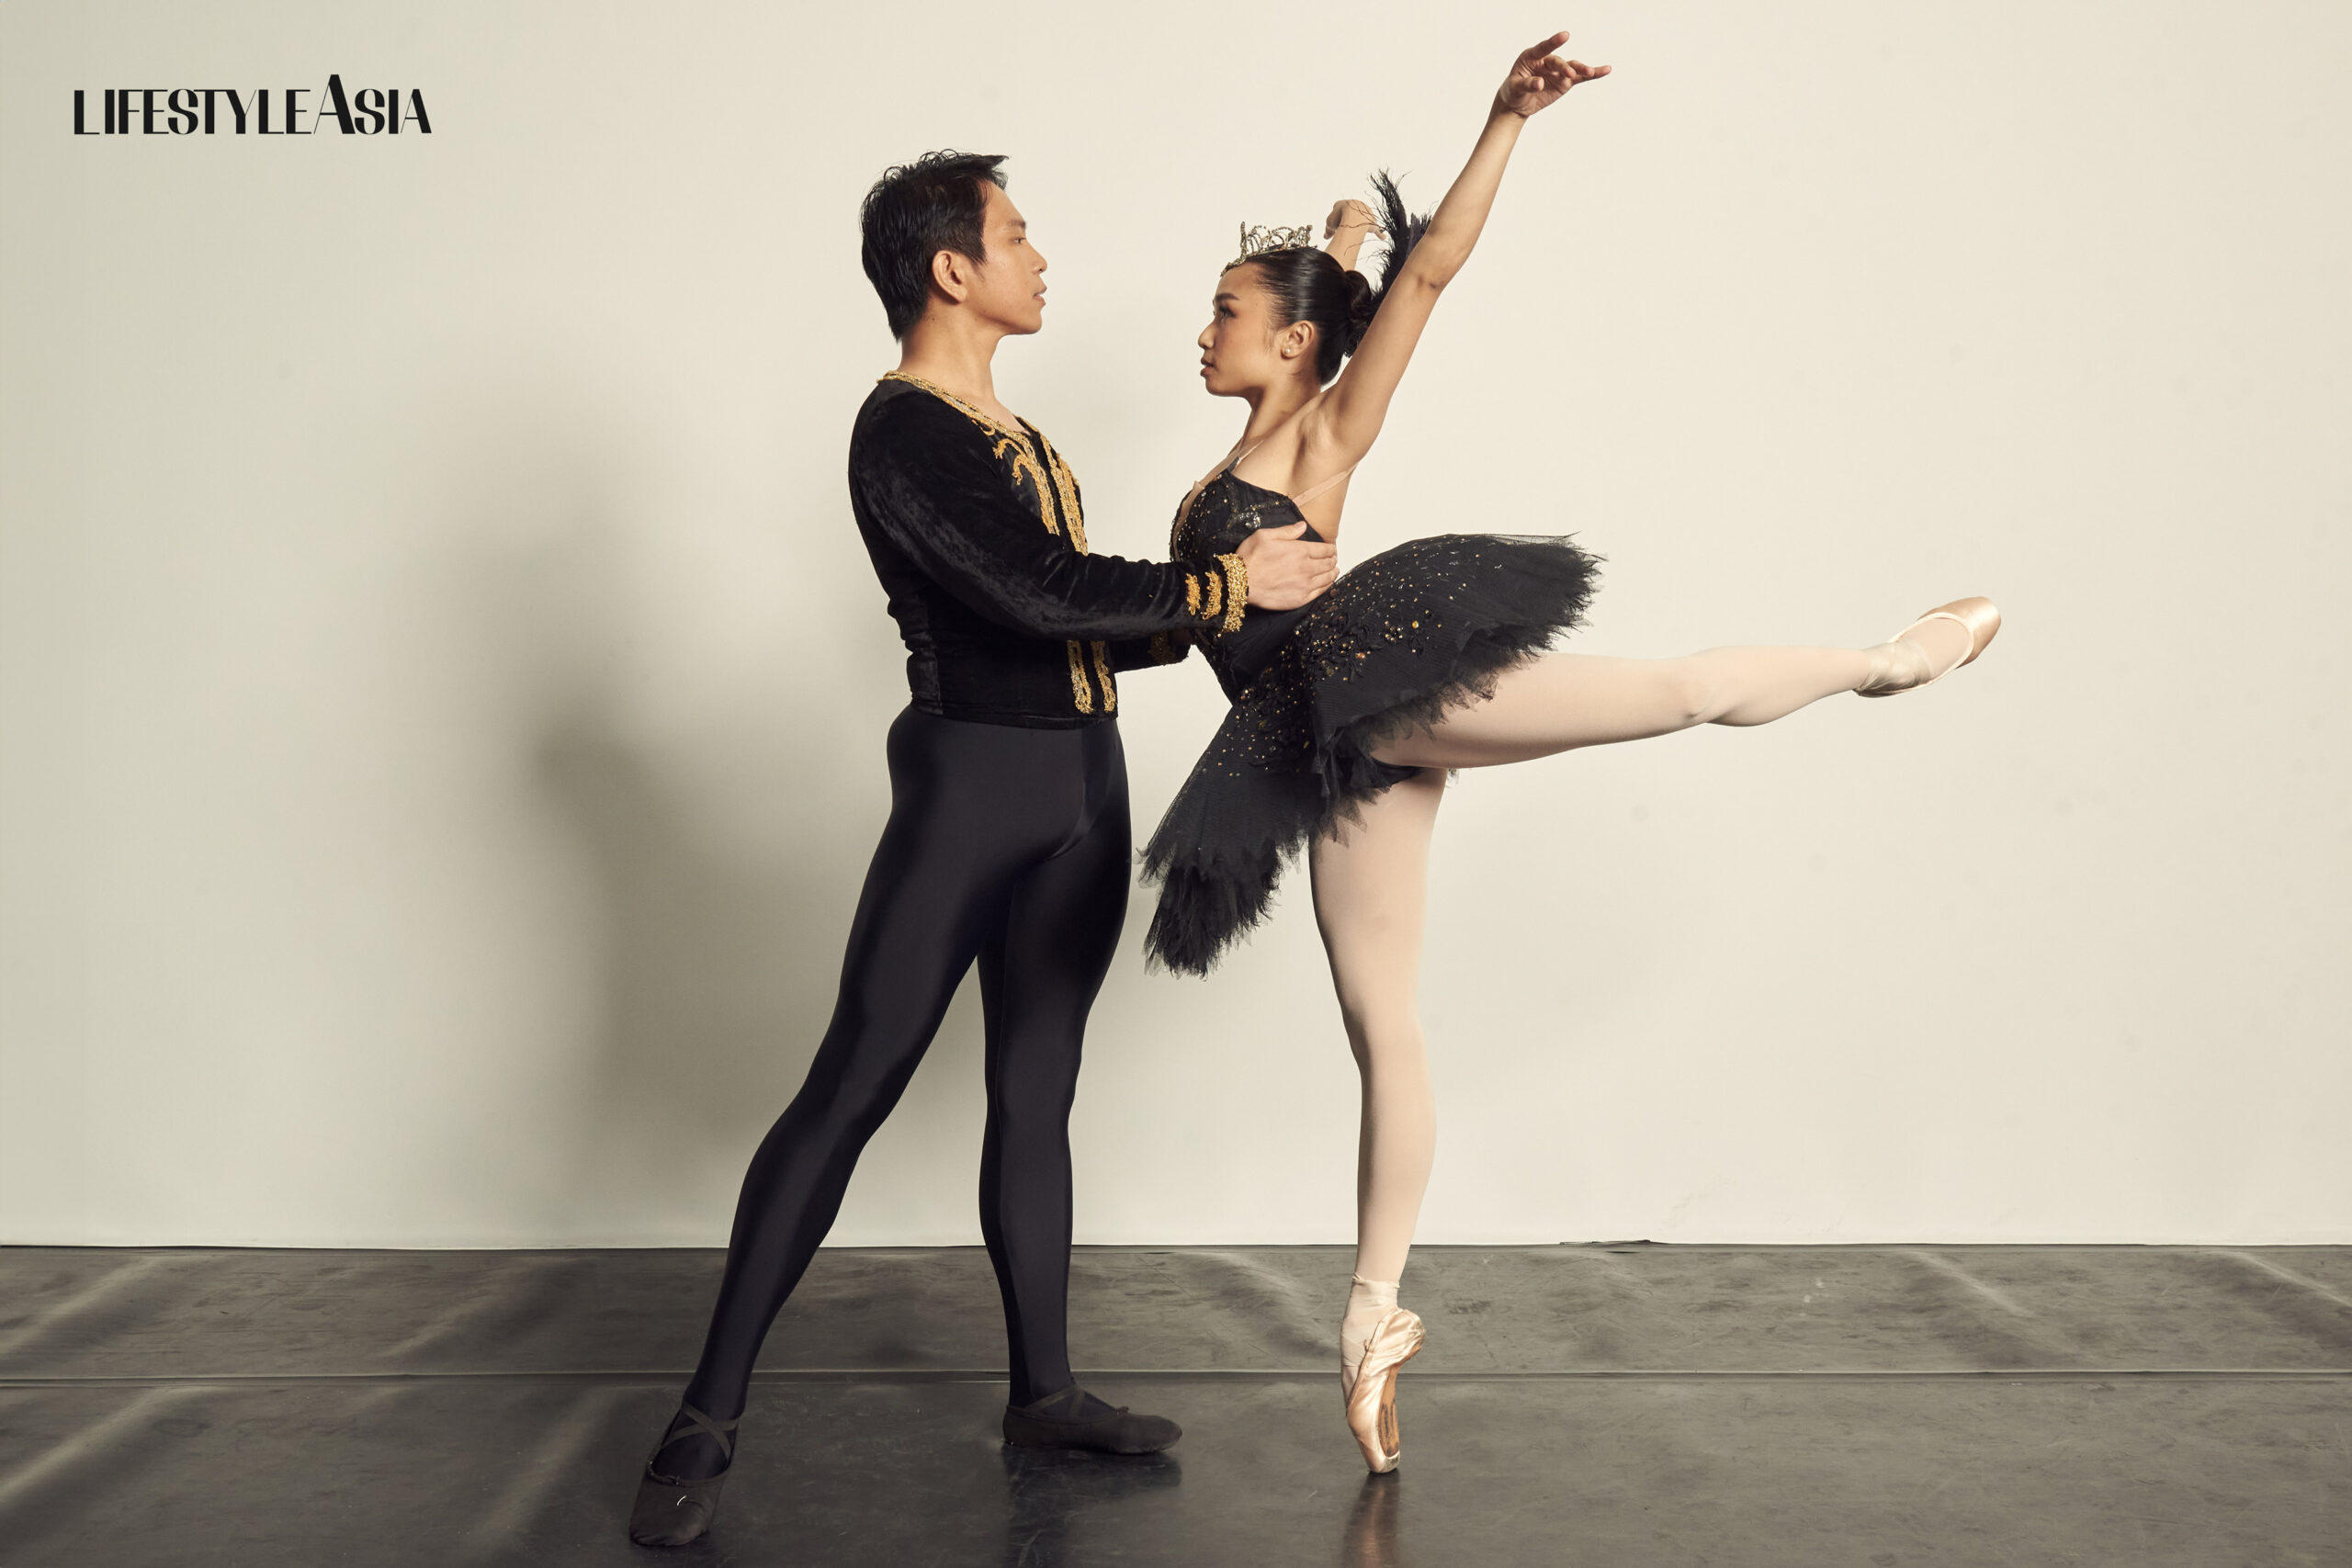 Ocampo and Reyes showcasing their ballet prowess